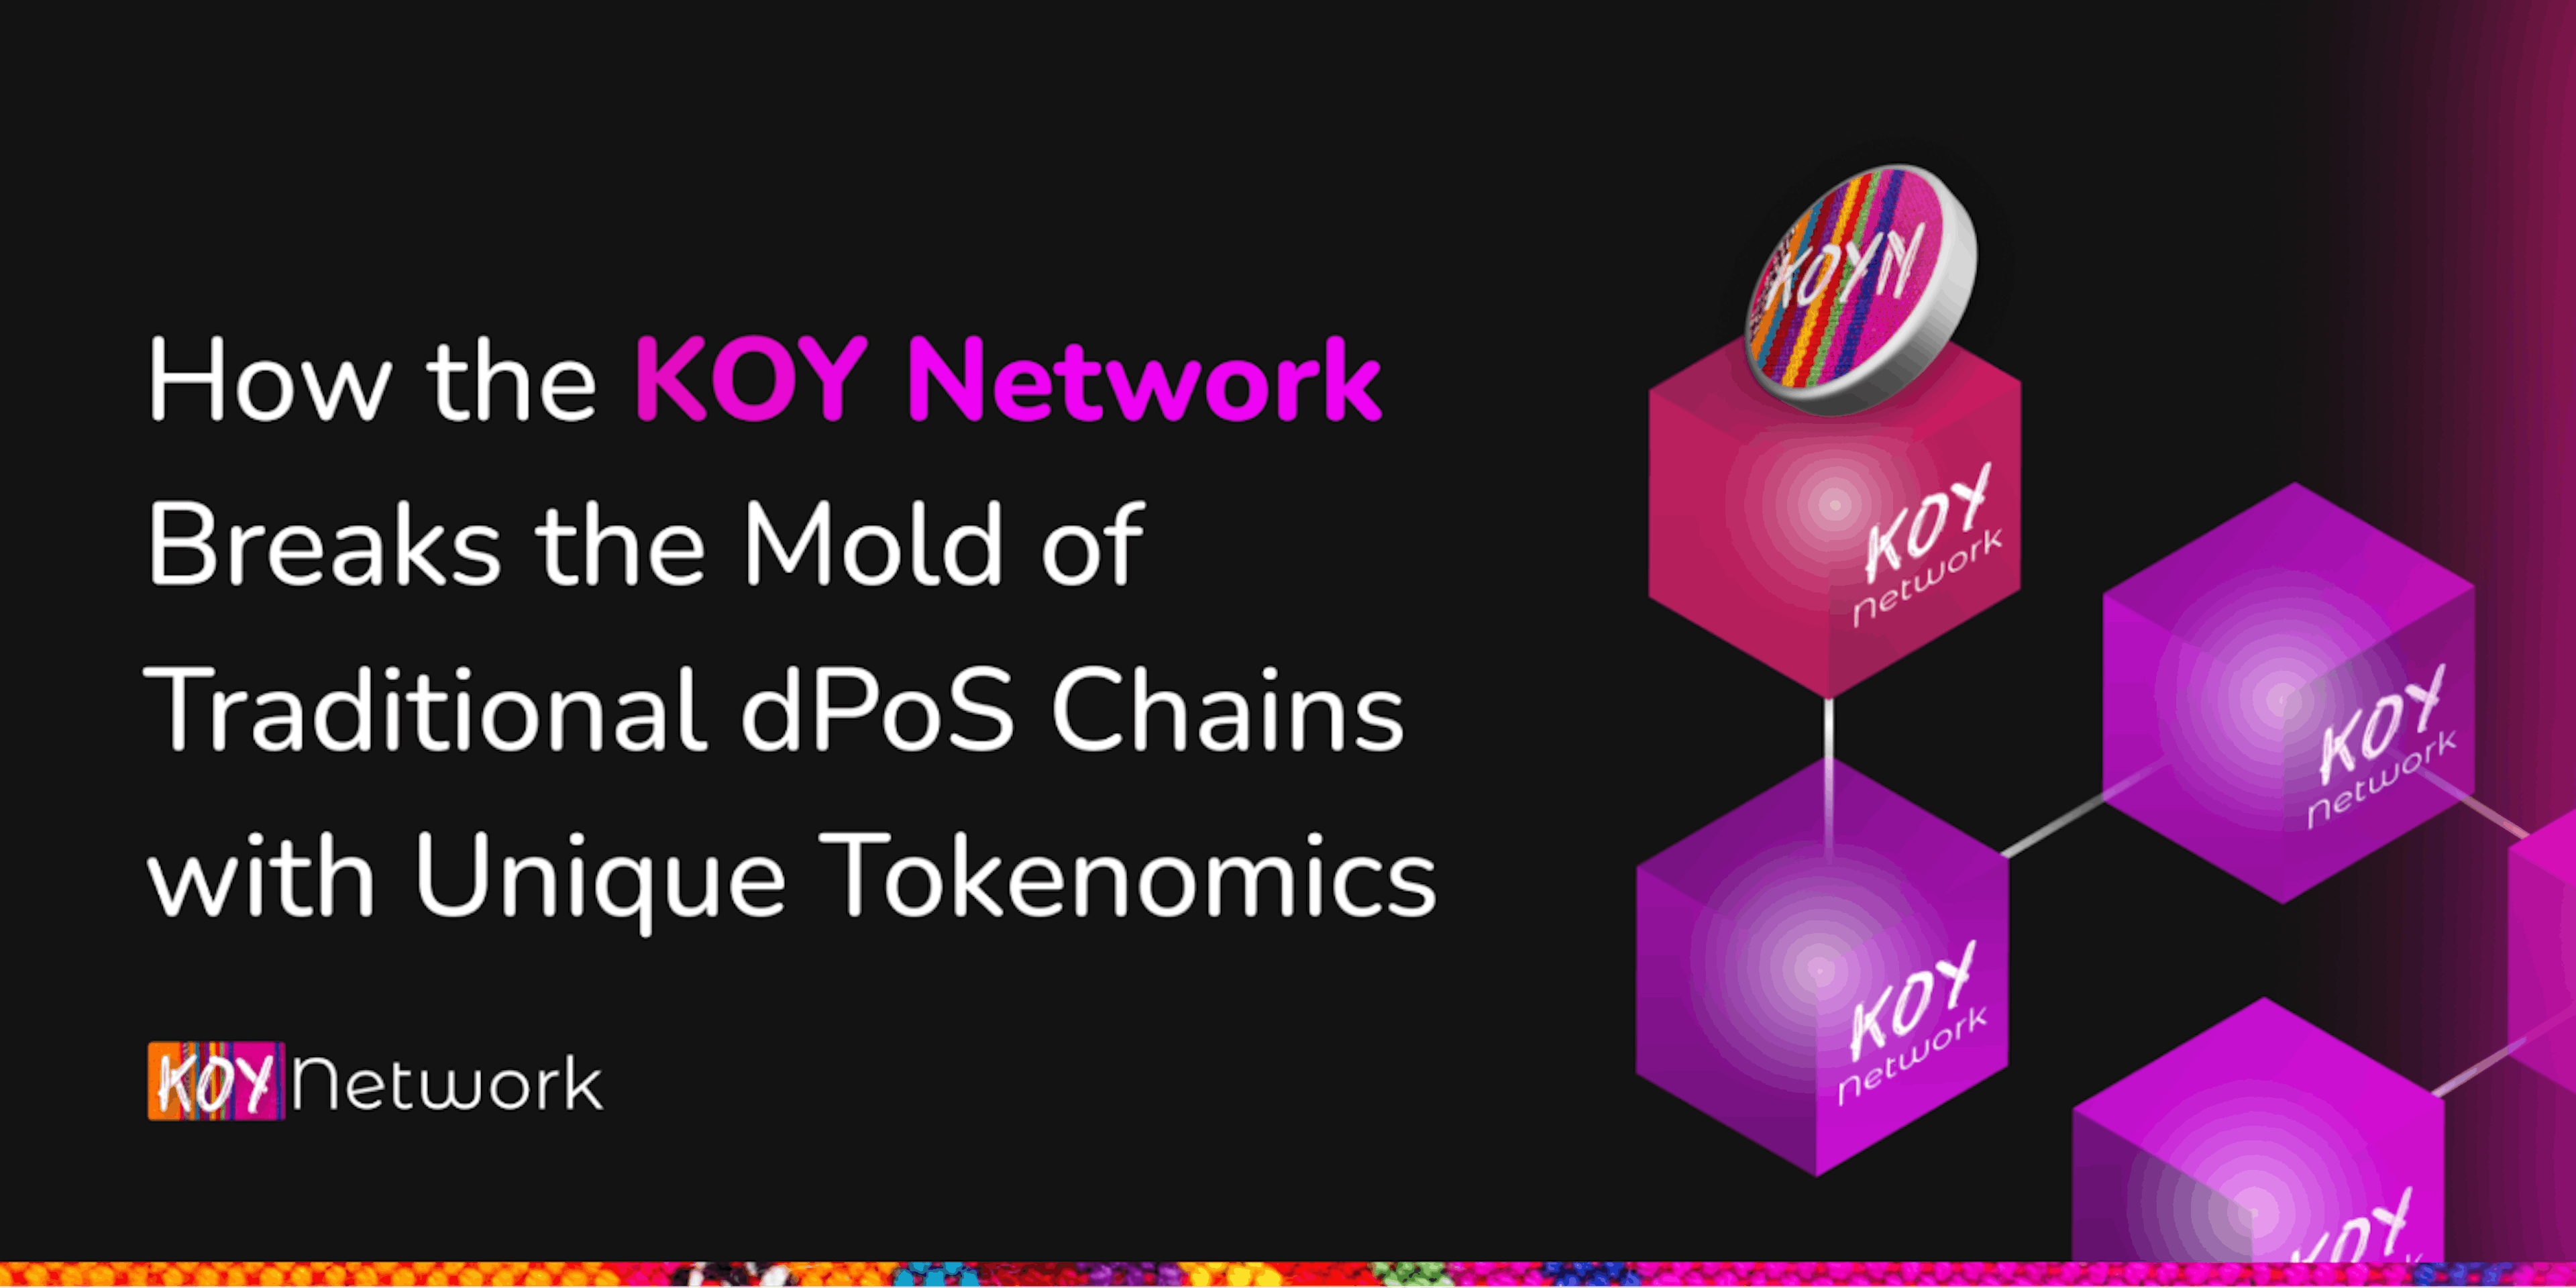 featured image - How the KOY Network Breaks the Mold of Traditional dPoS Chains with Unique Tokenomics